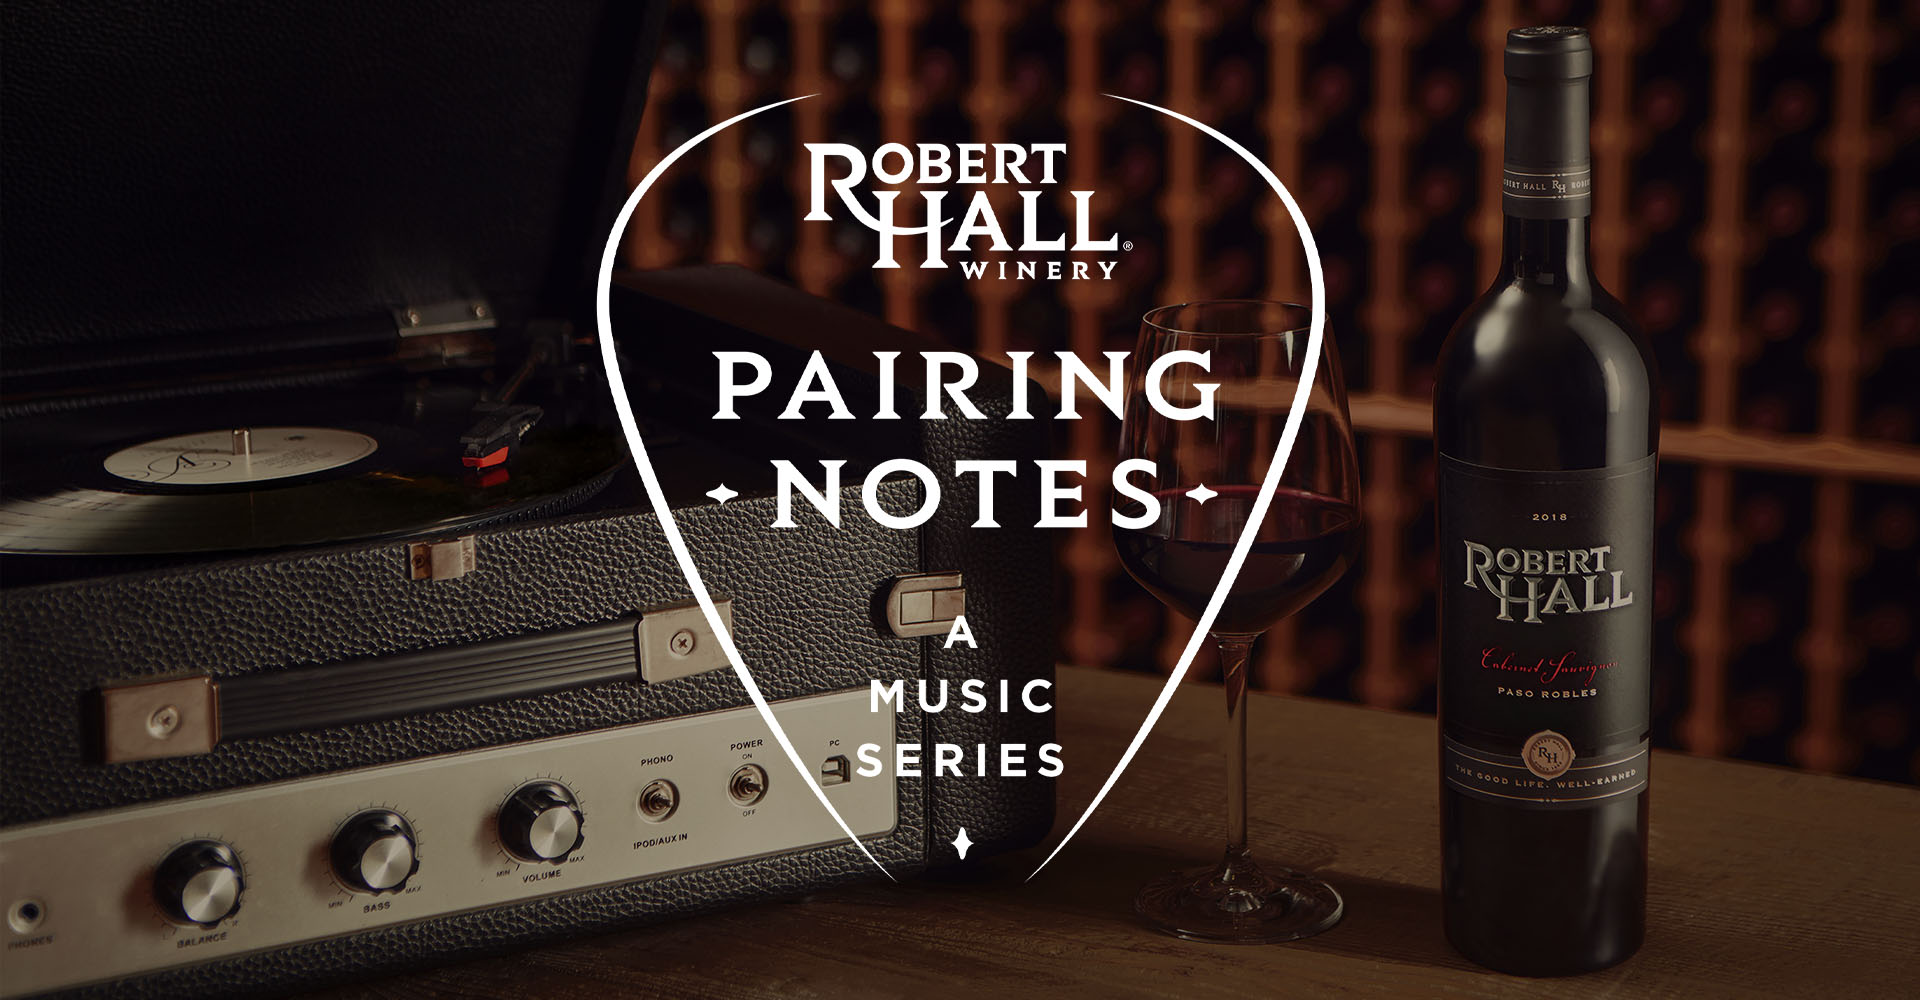 robert hall paring notes logo over a record player and a bottle of wine